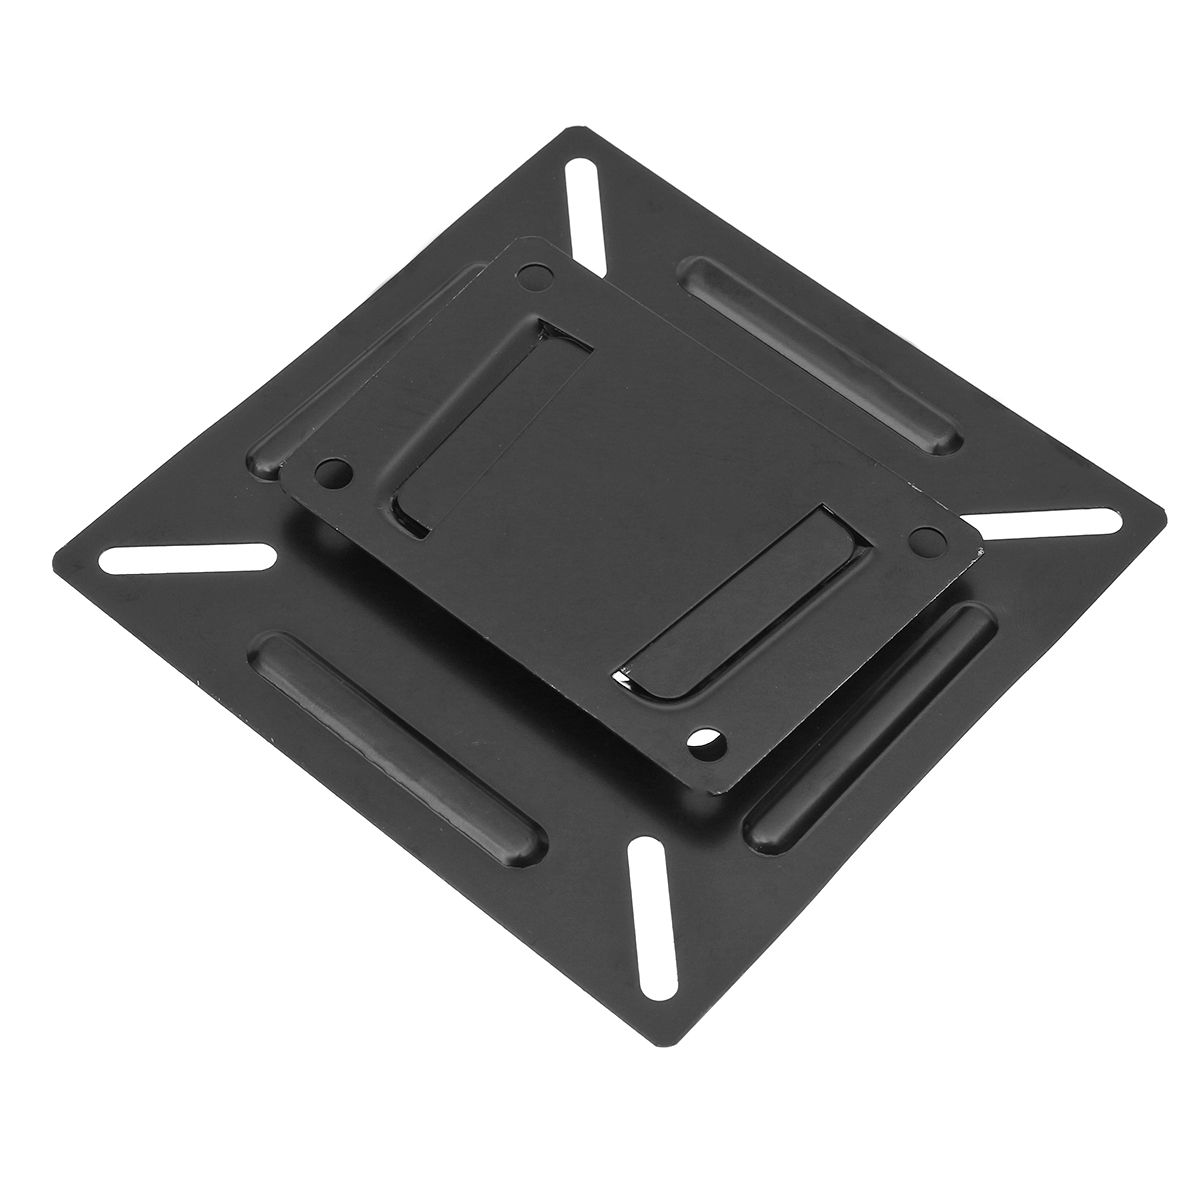 12-24-Inch-LCD-LED-Plasma-Monitor-TV-LCD-Screen-Computer-Wall-Mount-Bracket-TV-Support-1301089